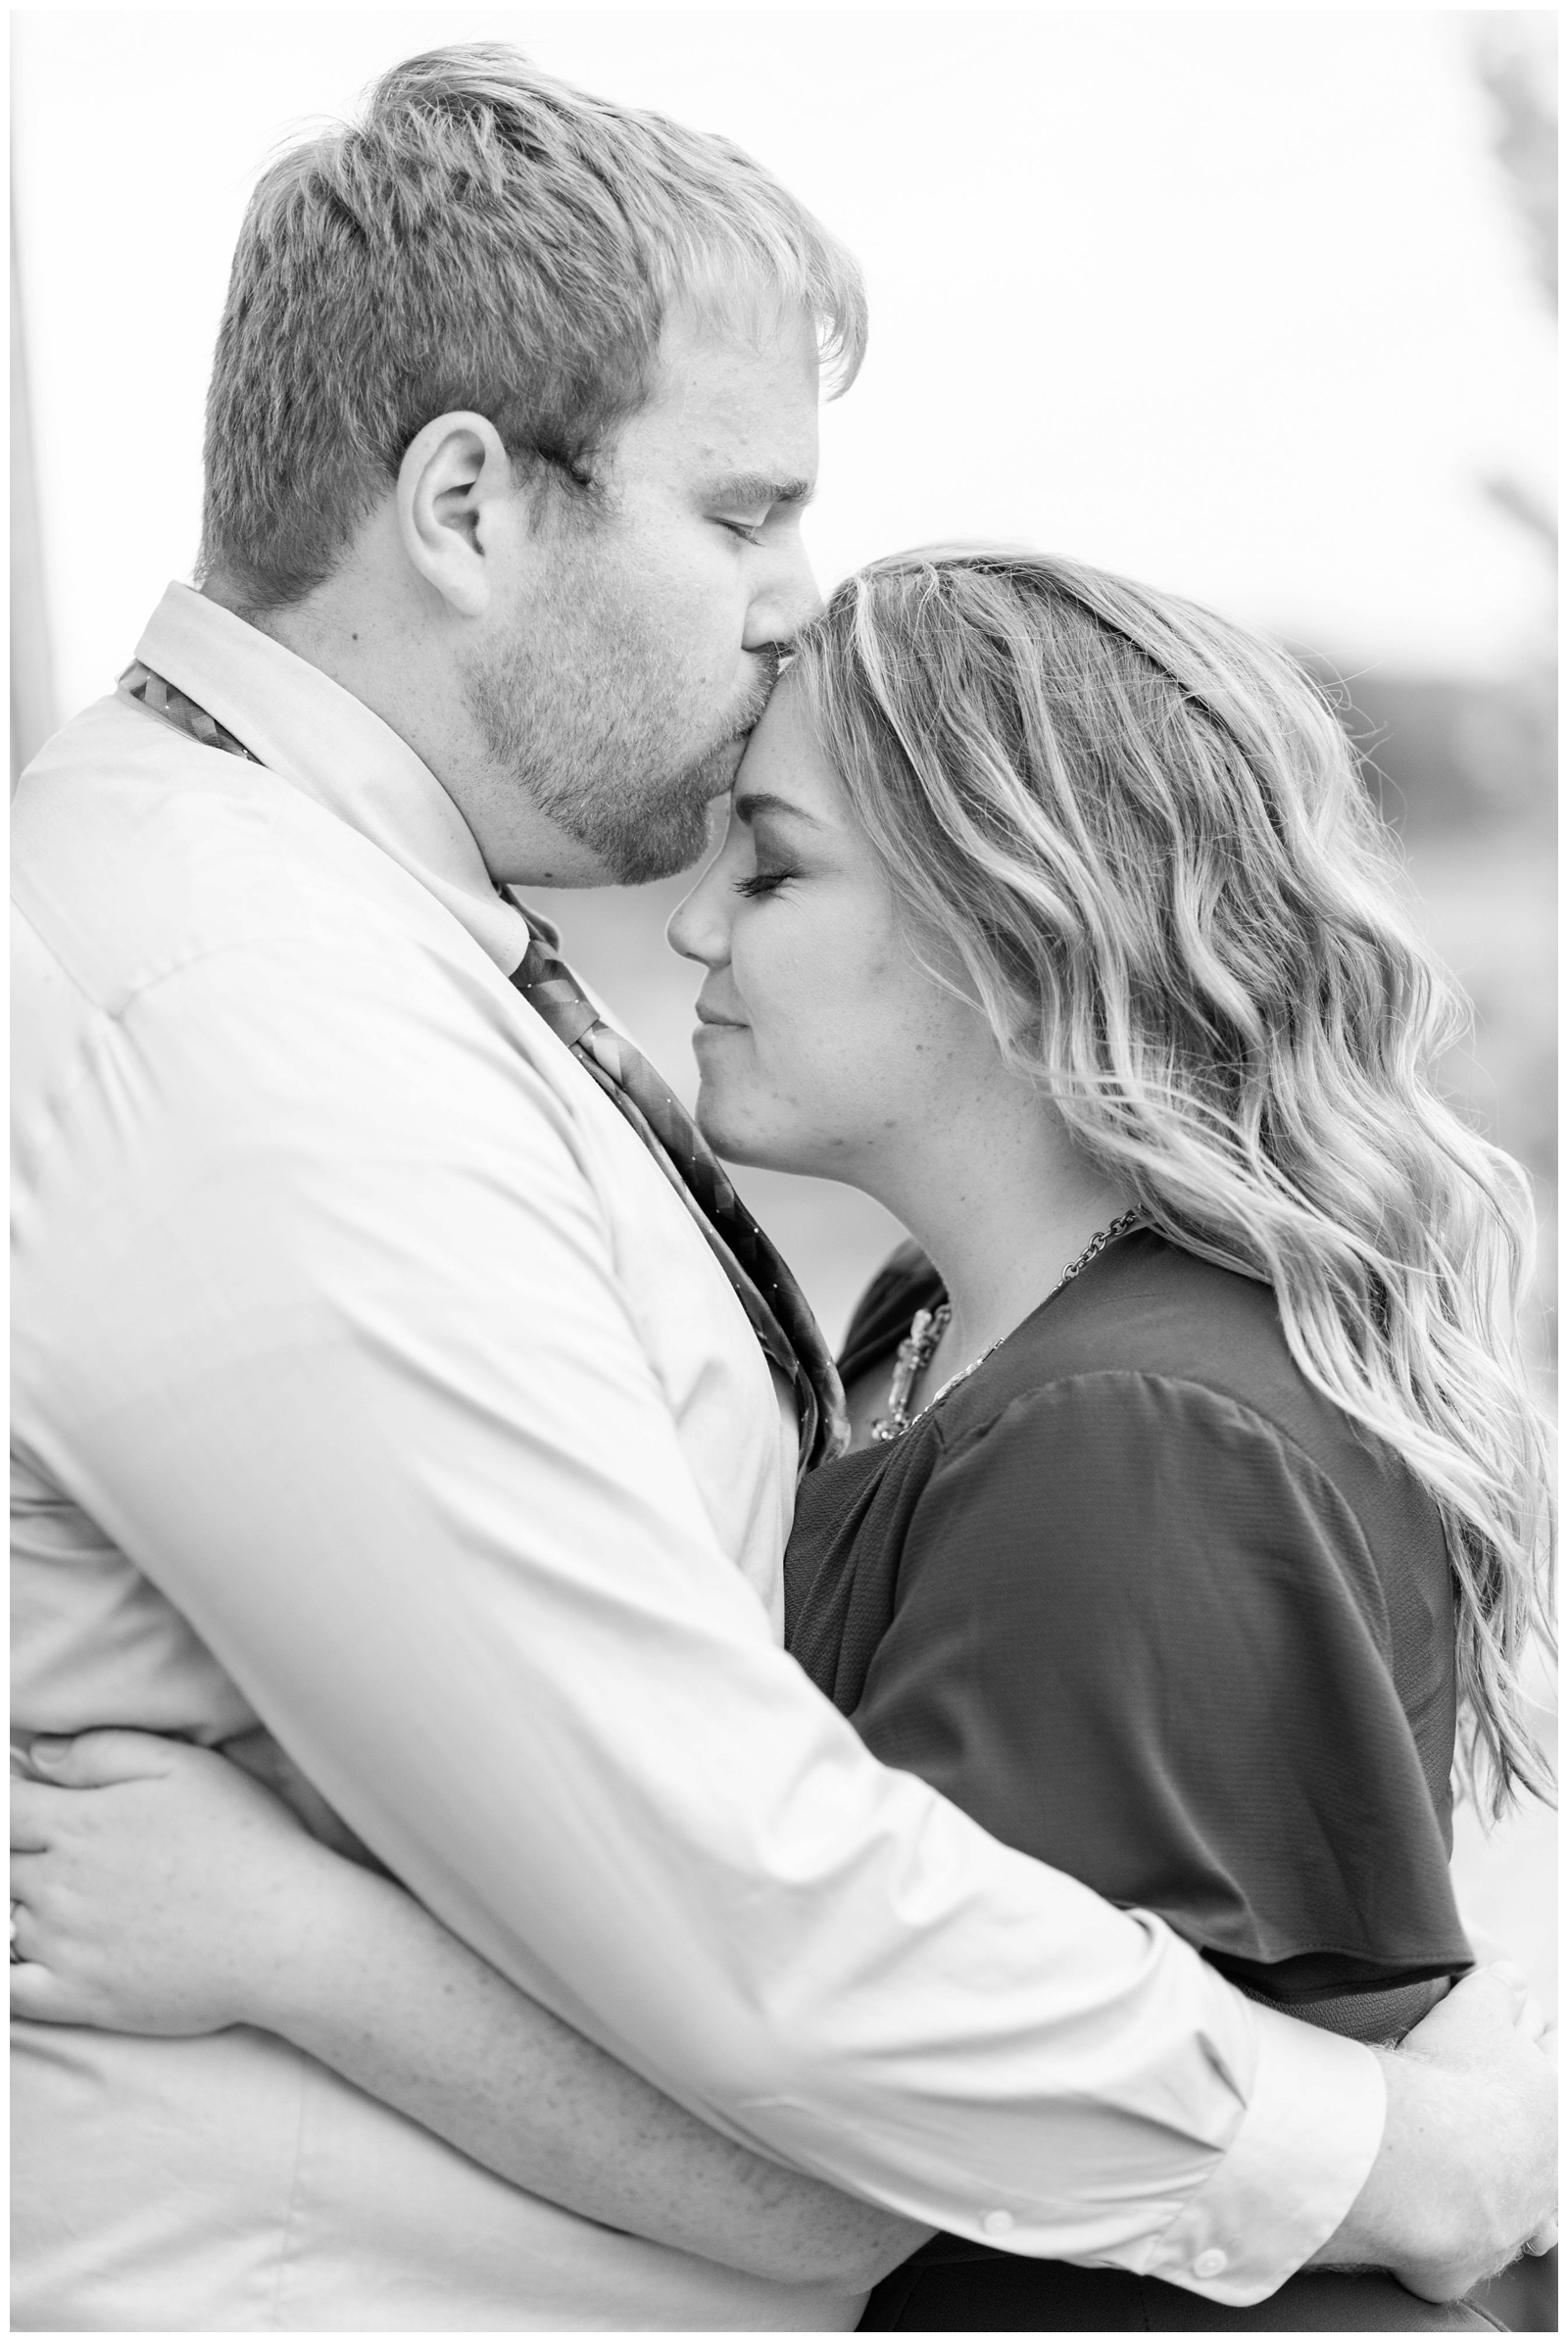 black and white close up photo of groom-to-be kissing fiancee during engagement portraits at Dawes Arboretum